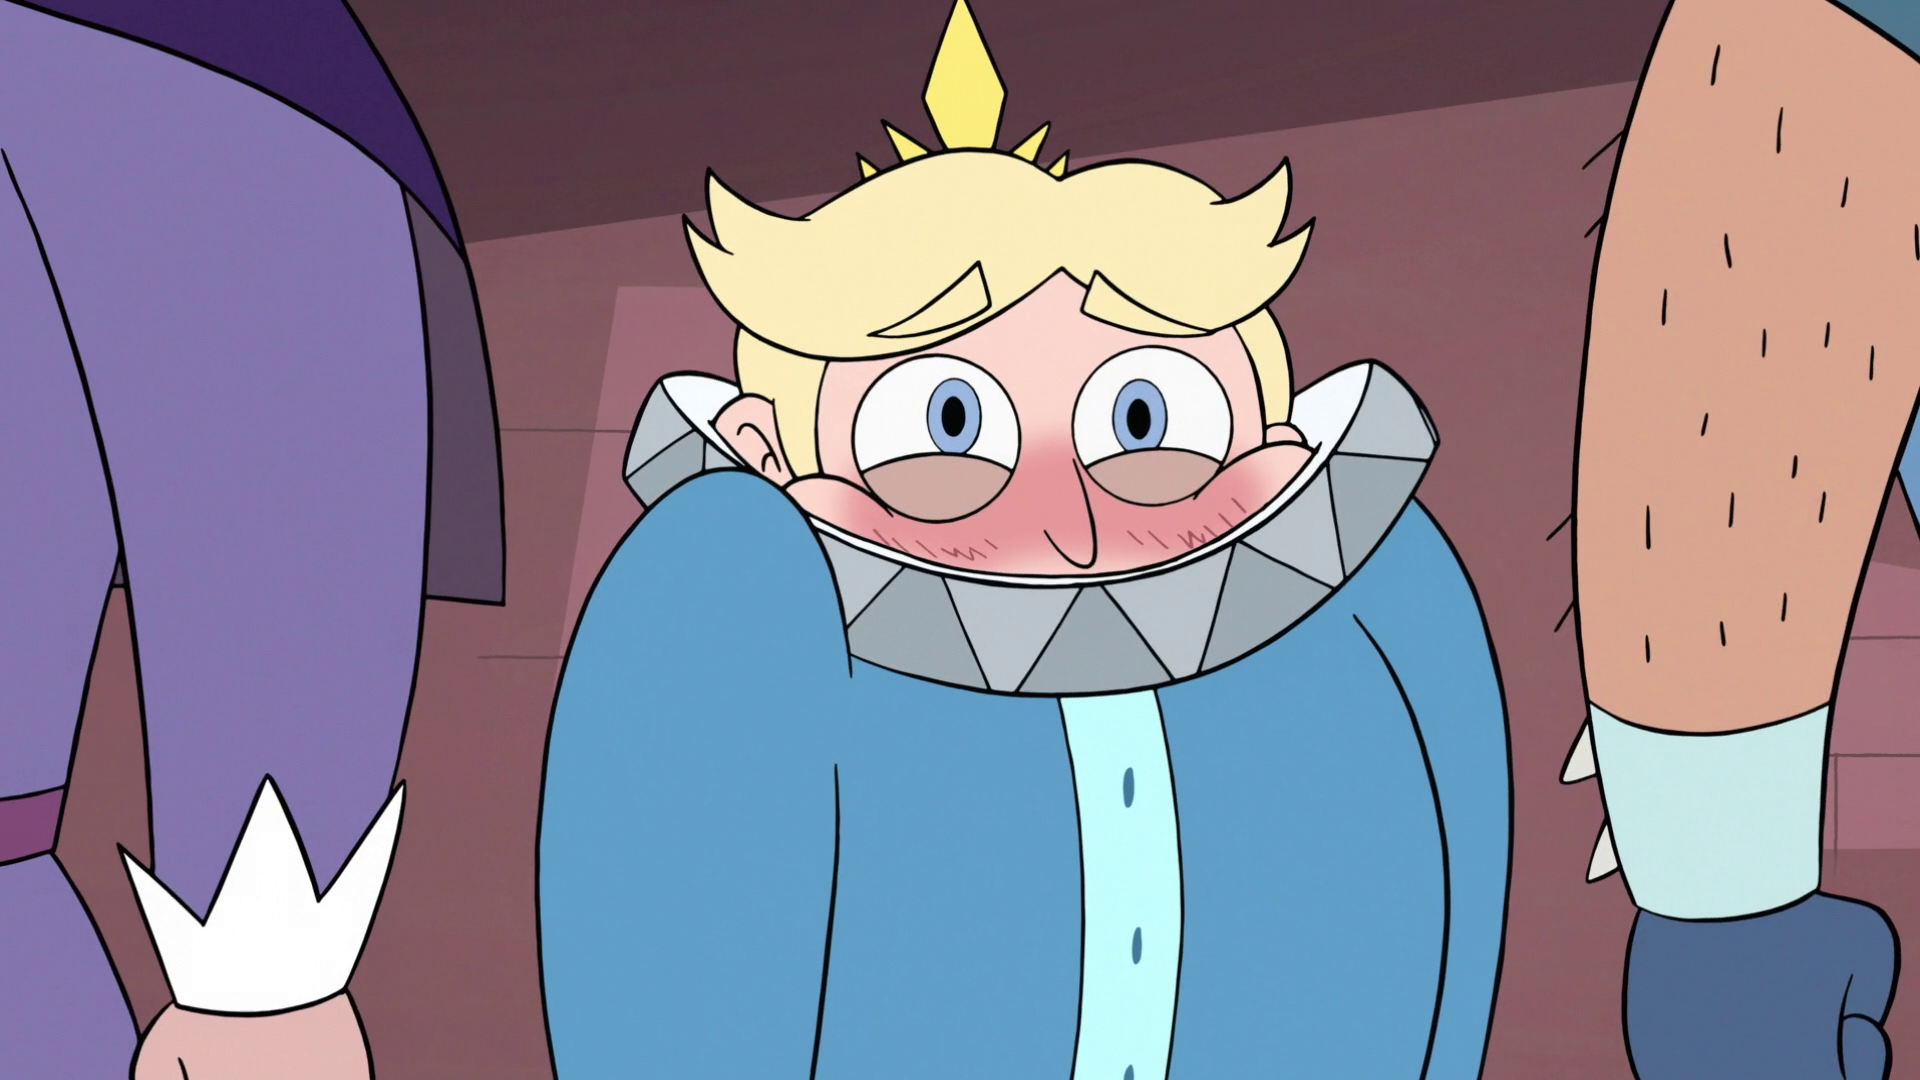 Image - S3E2 River Johansen blushing in embarrassment.png | Star vs. the Forces of Evil Wiki